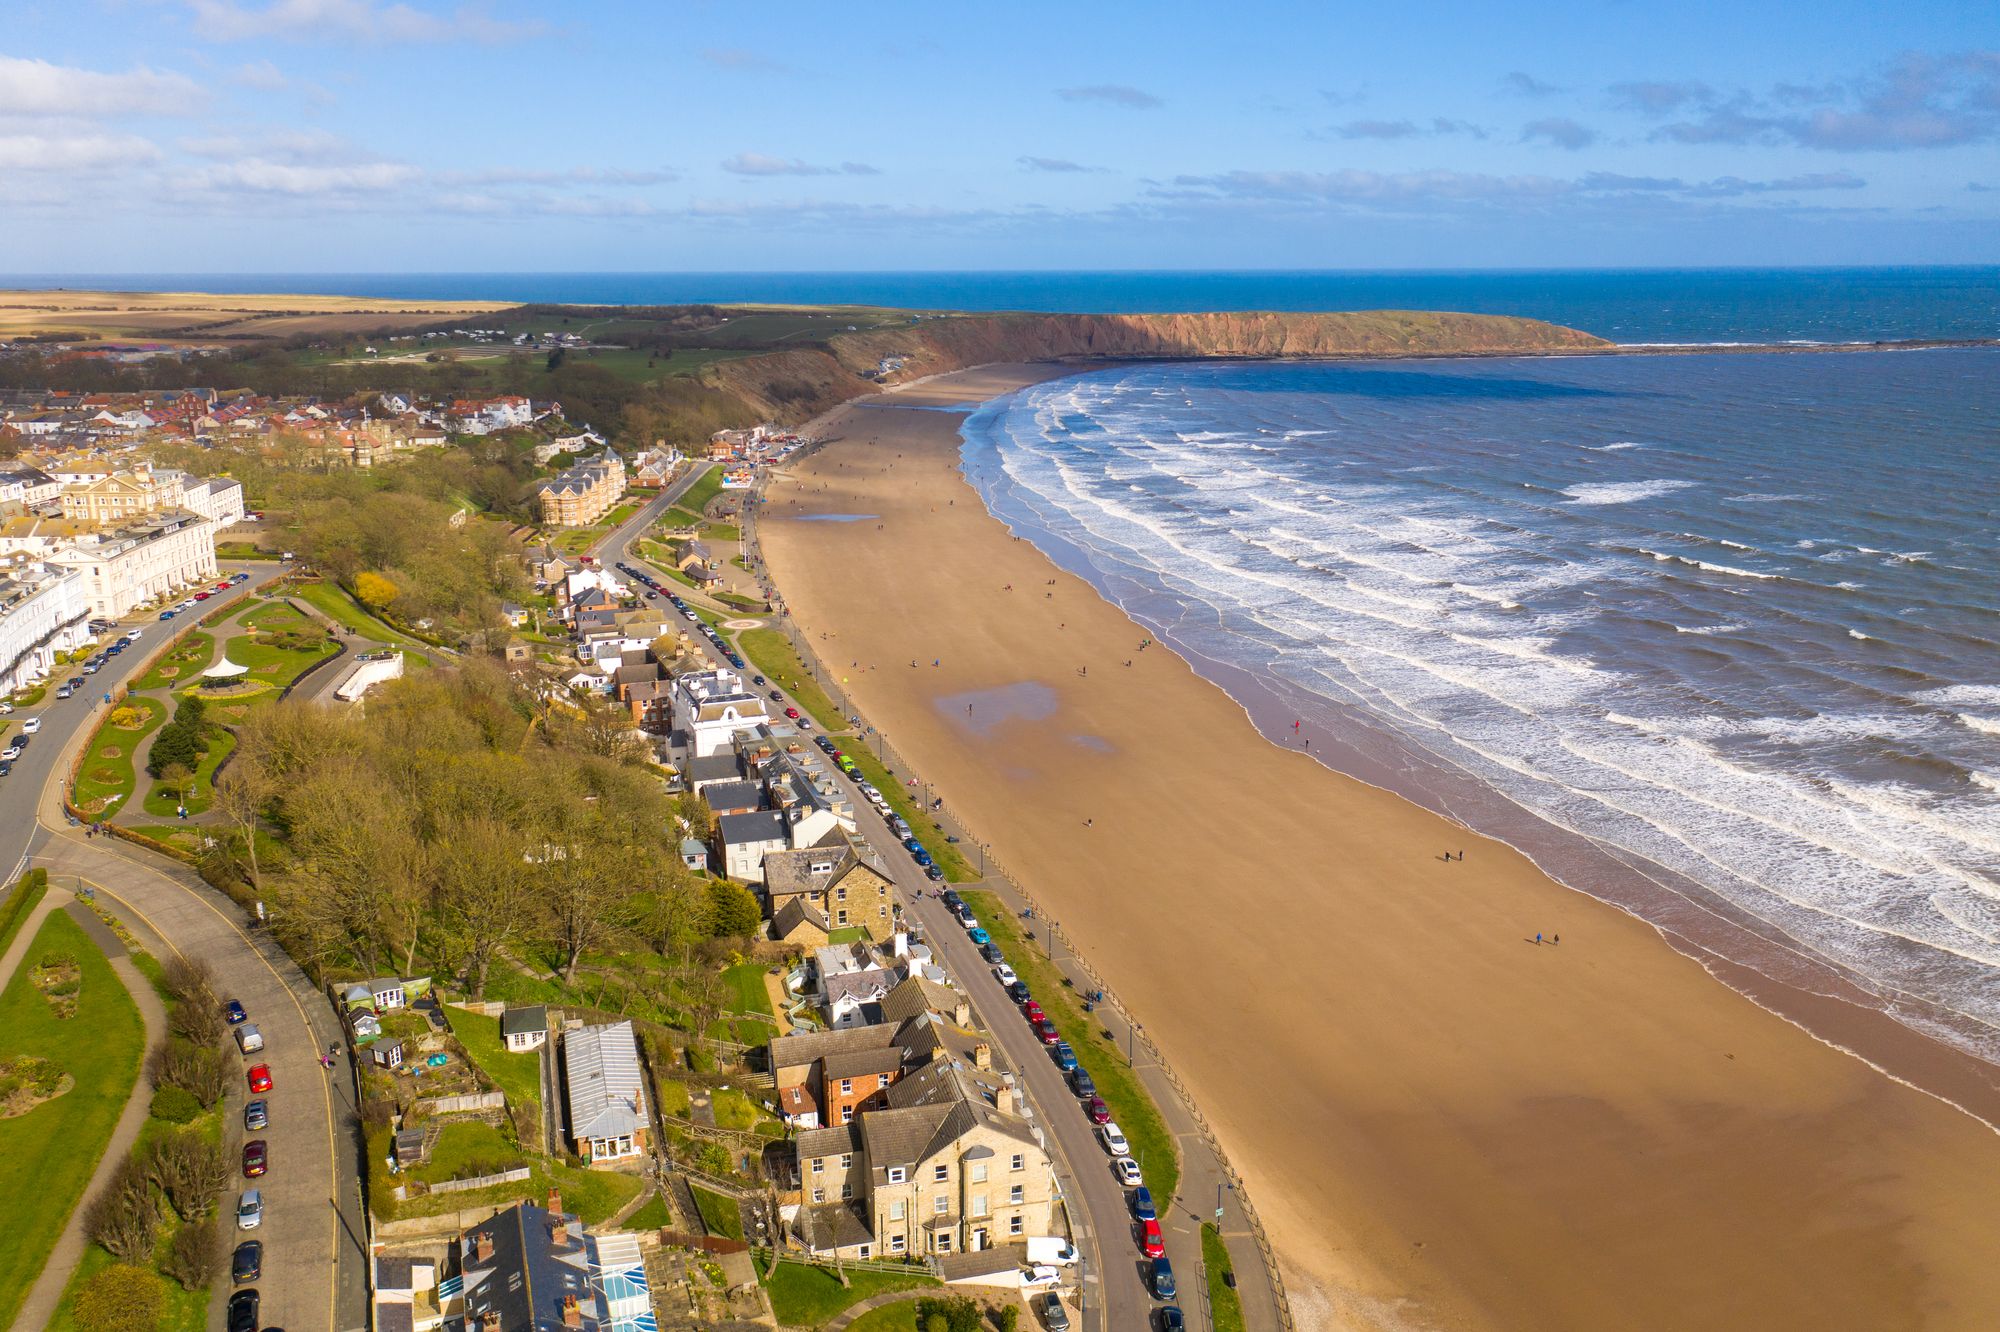 An aerial view of Filey beach and Filey Brigg